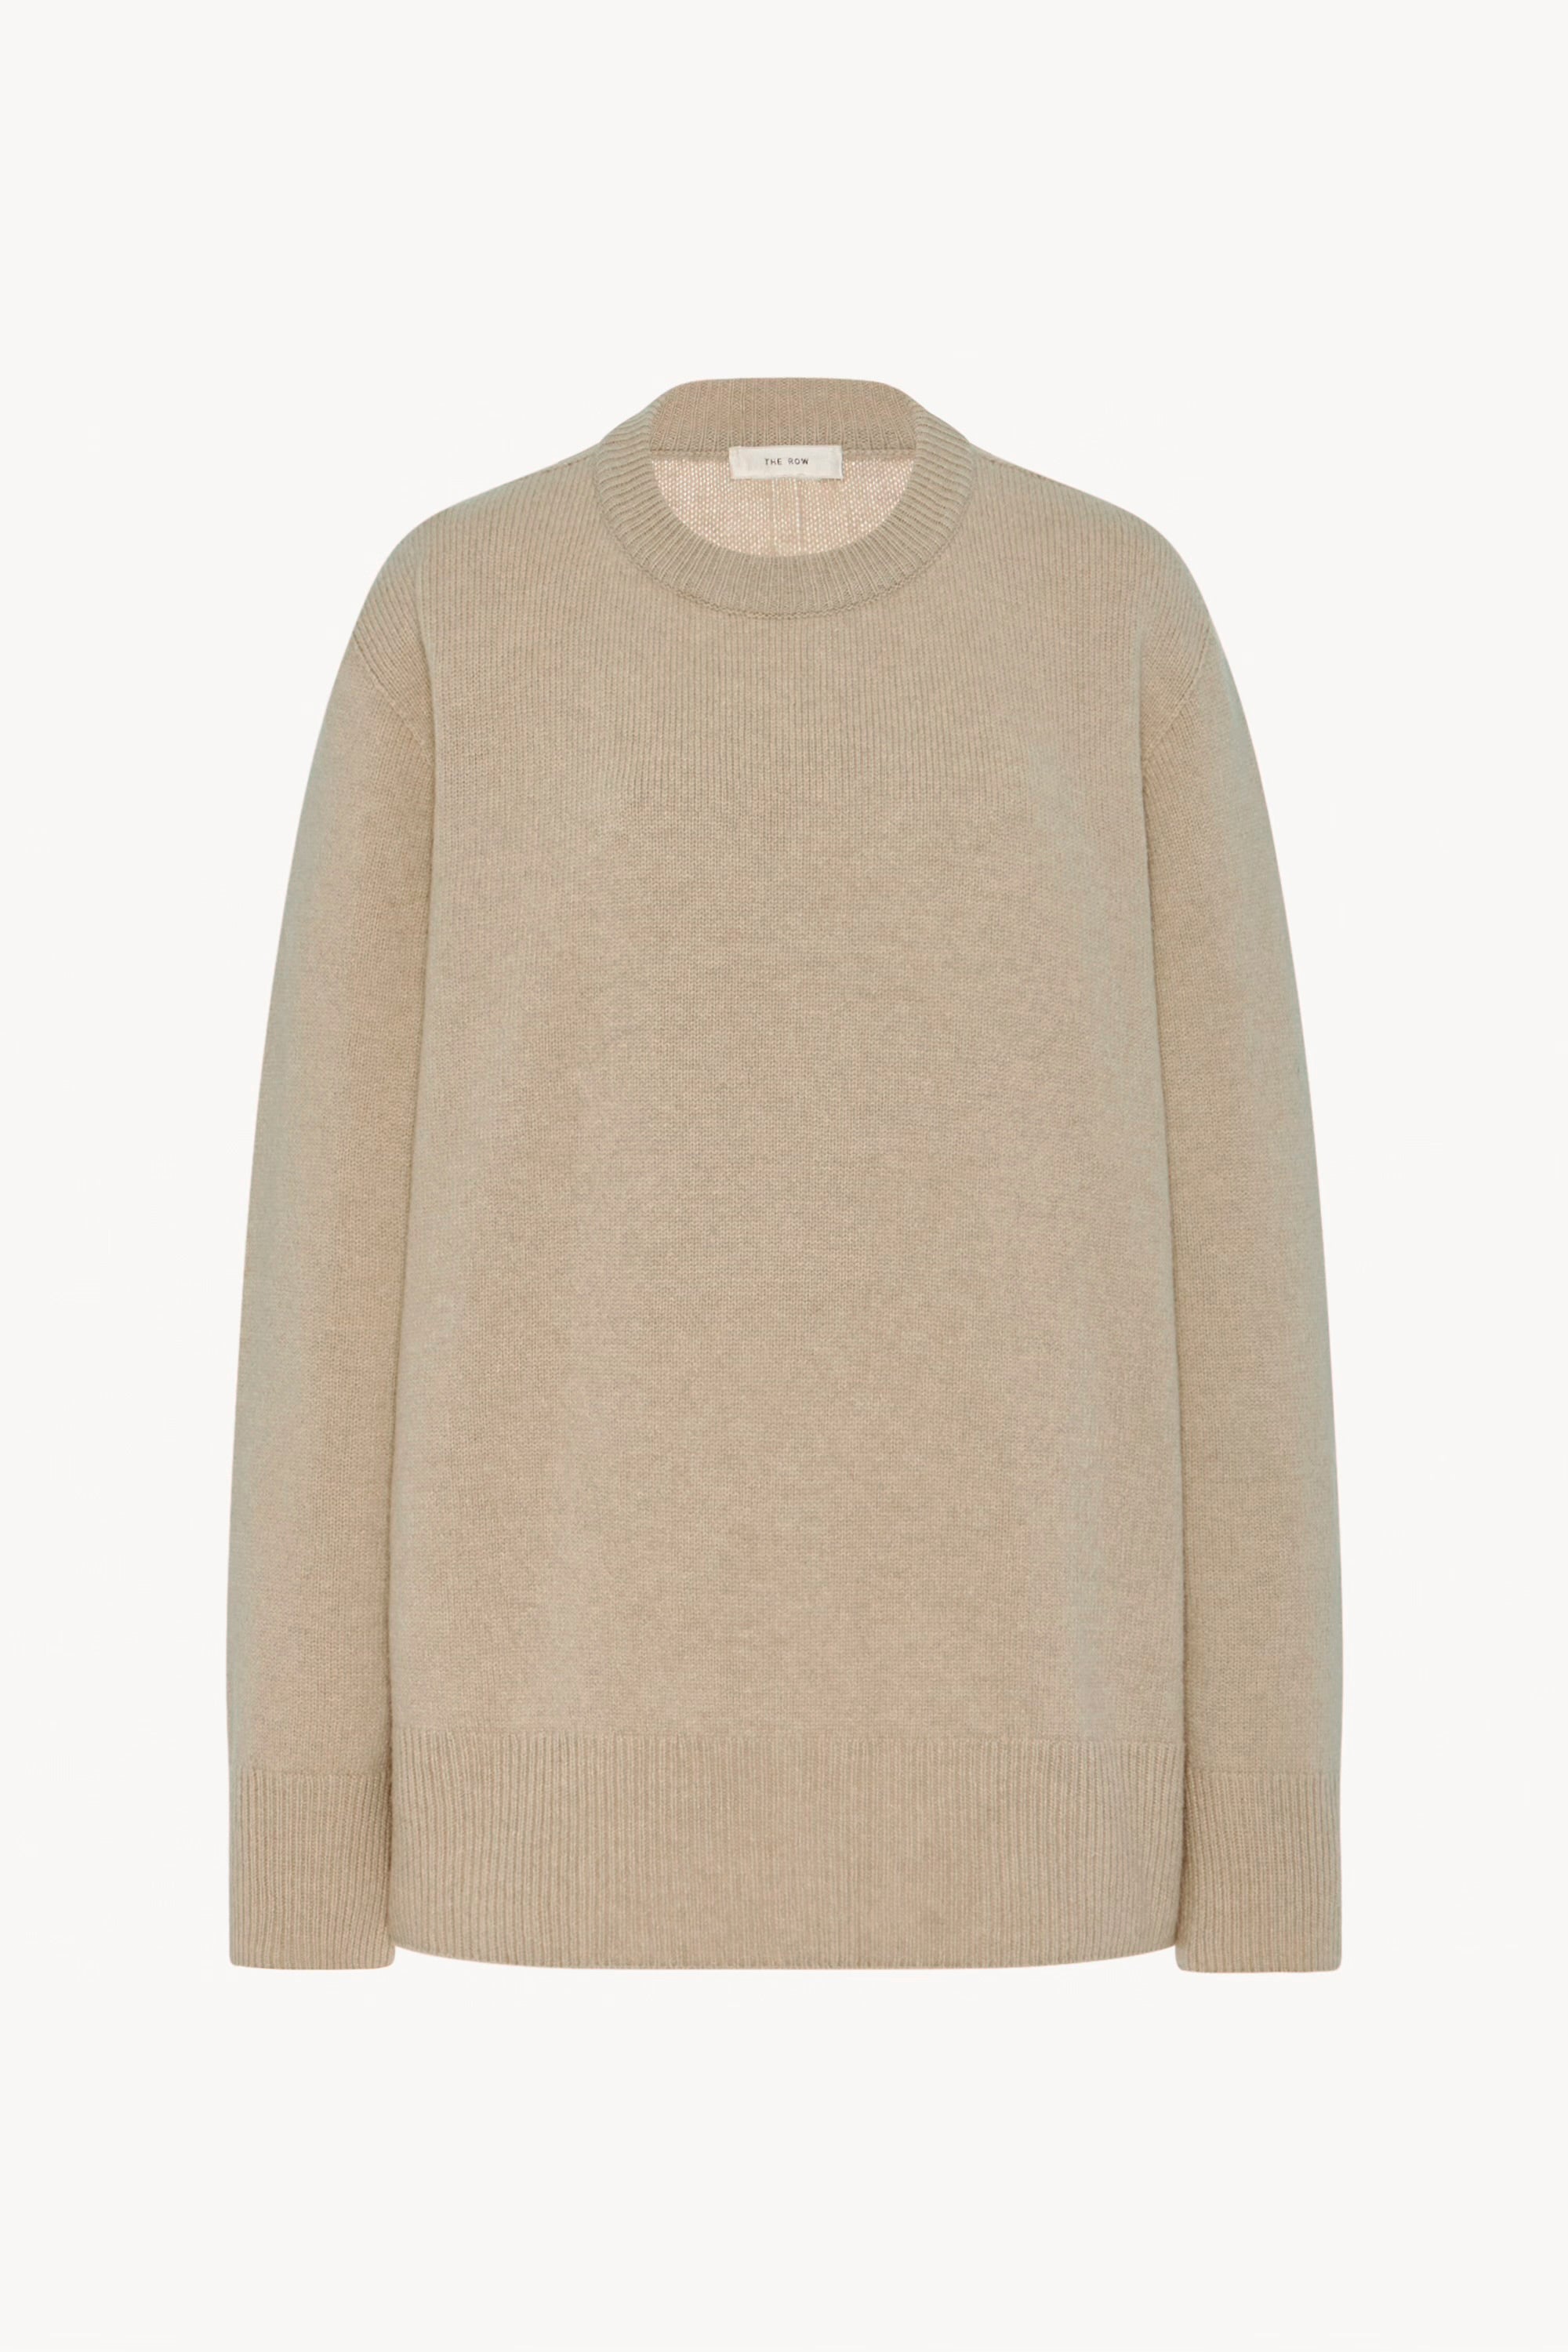 Sibem Top Tan in Wool and Cashmere – The Row